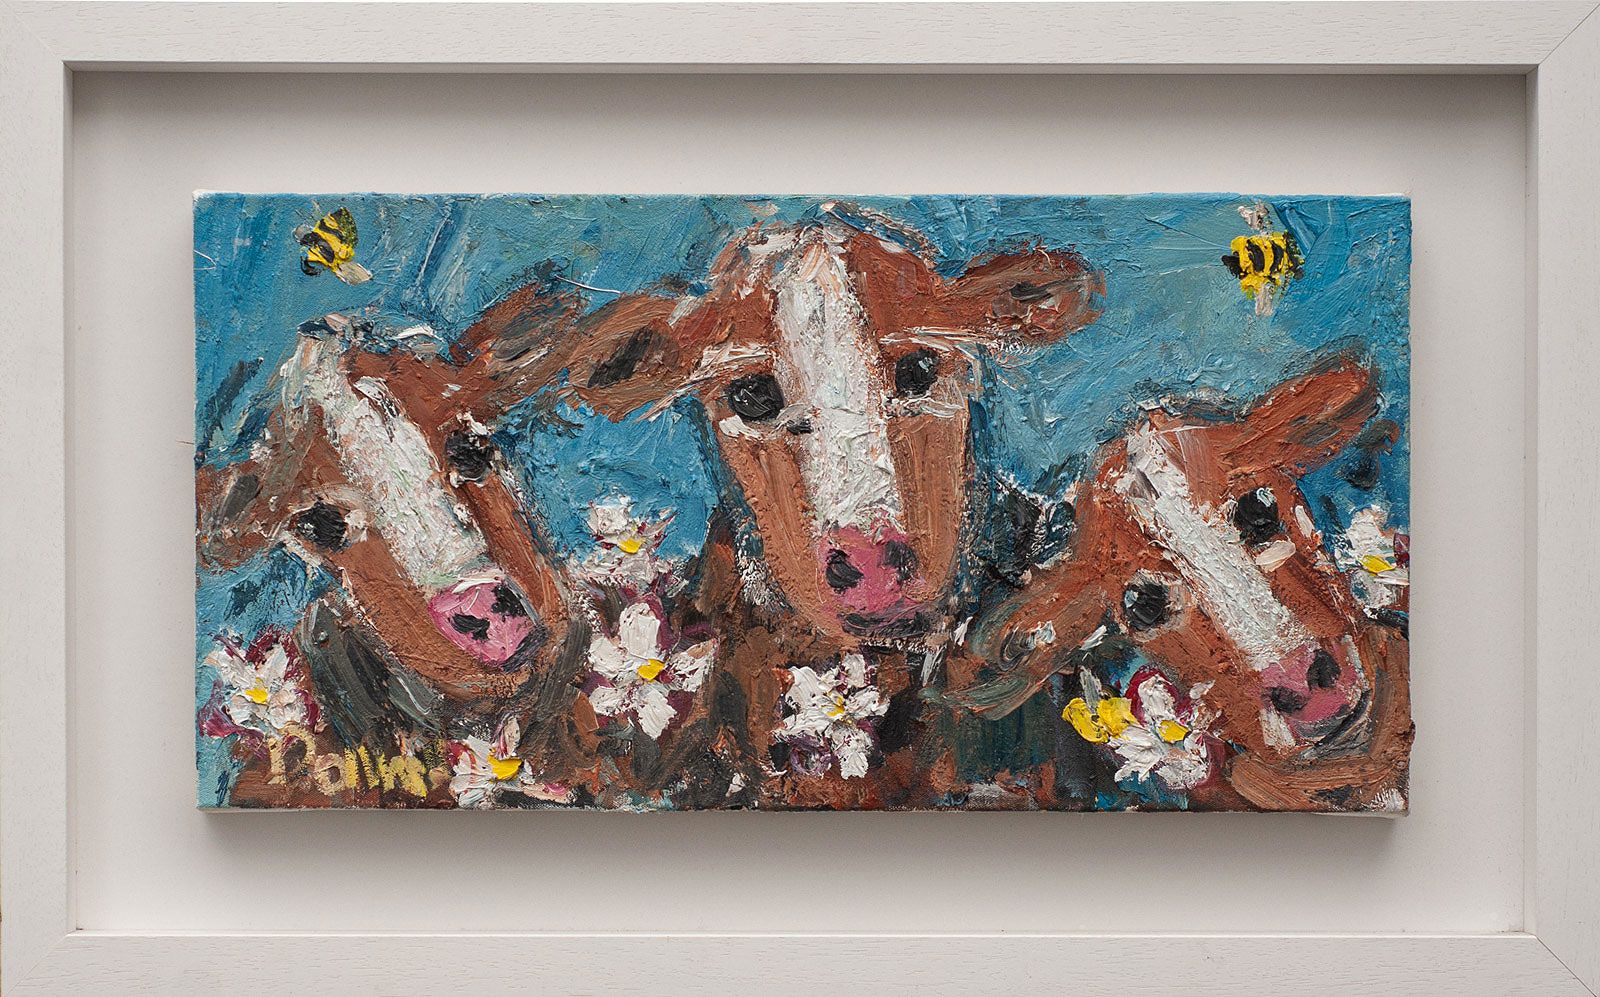 Three Cows & Flowers by Deborah Donnelly